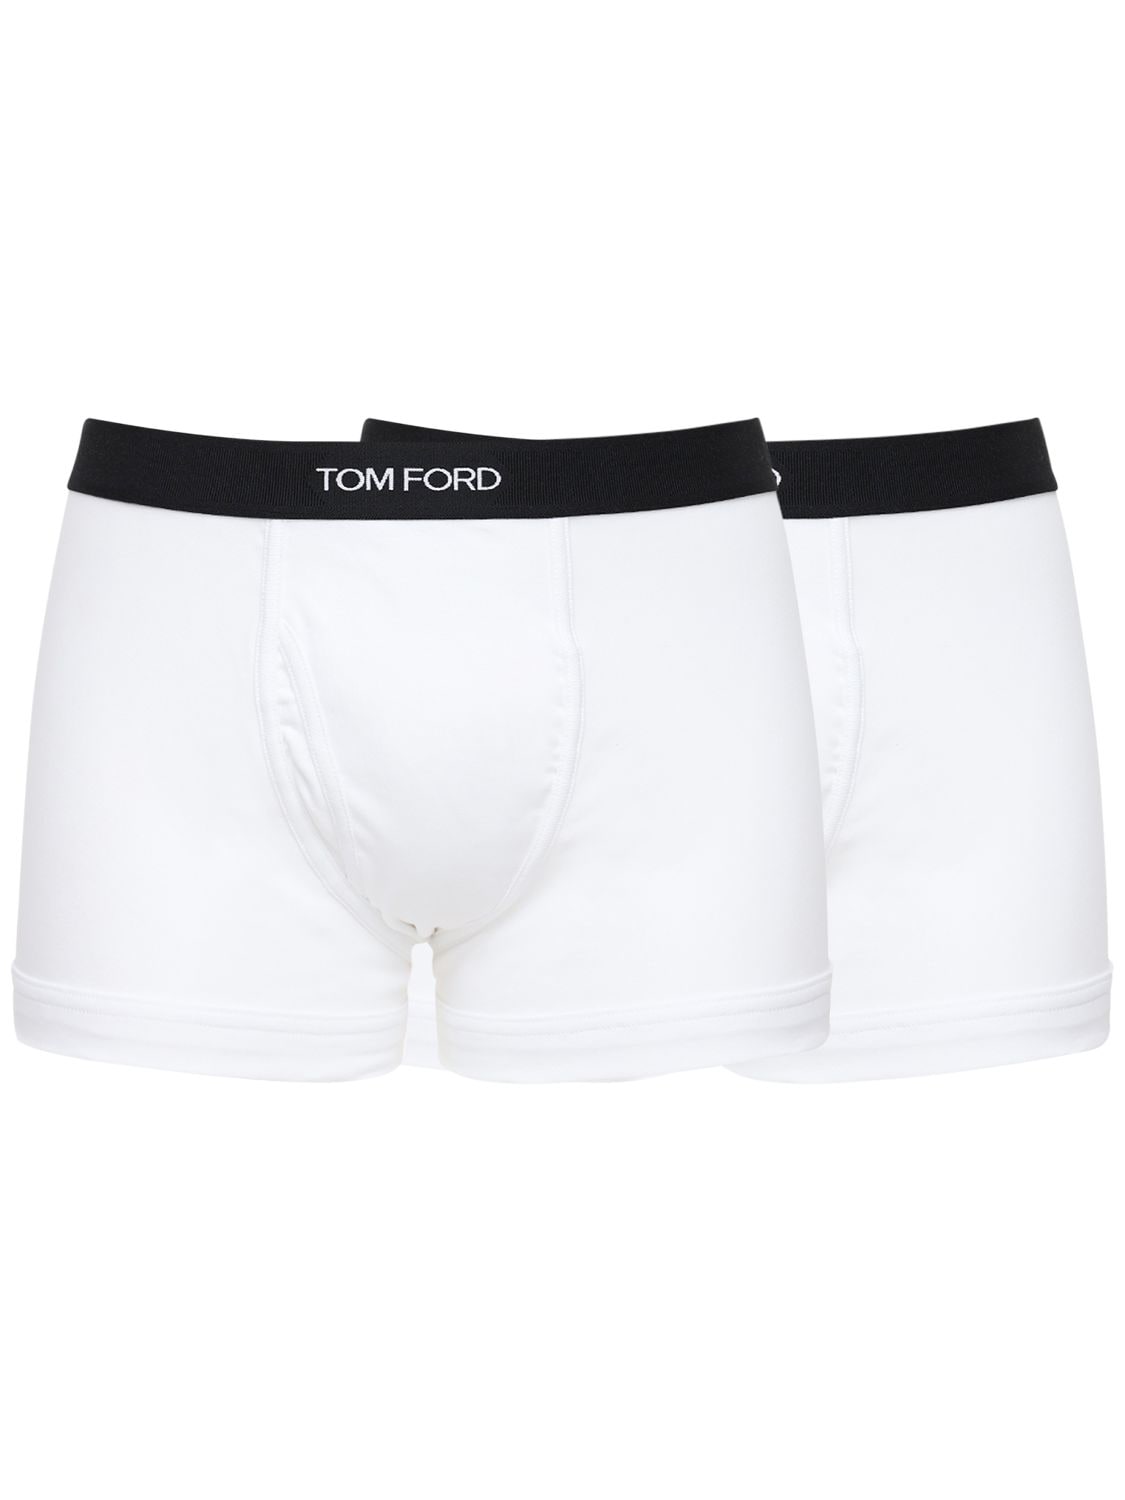 TOM FORD Pack Of 2 Logo Cotton Boxer Briefs